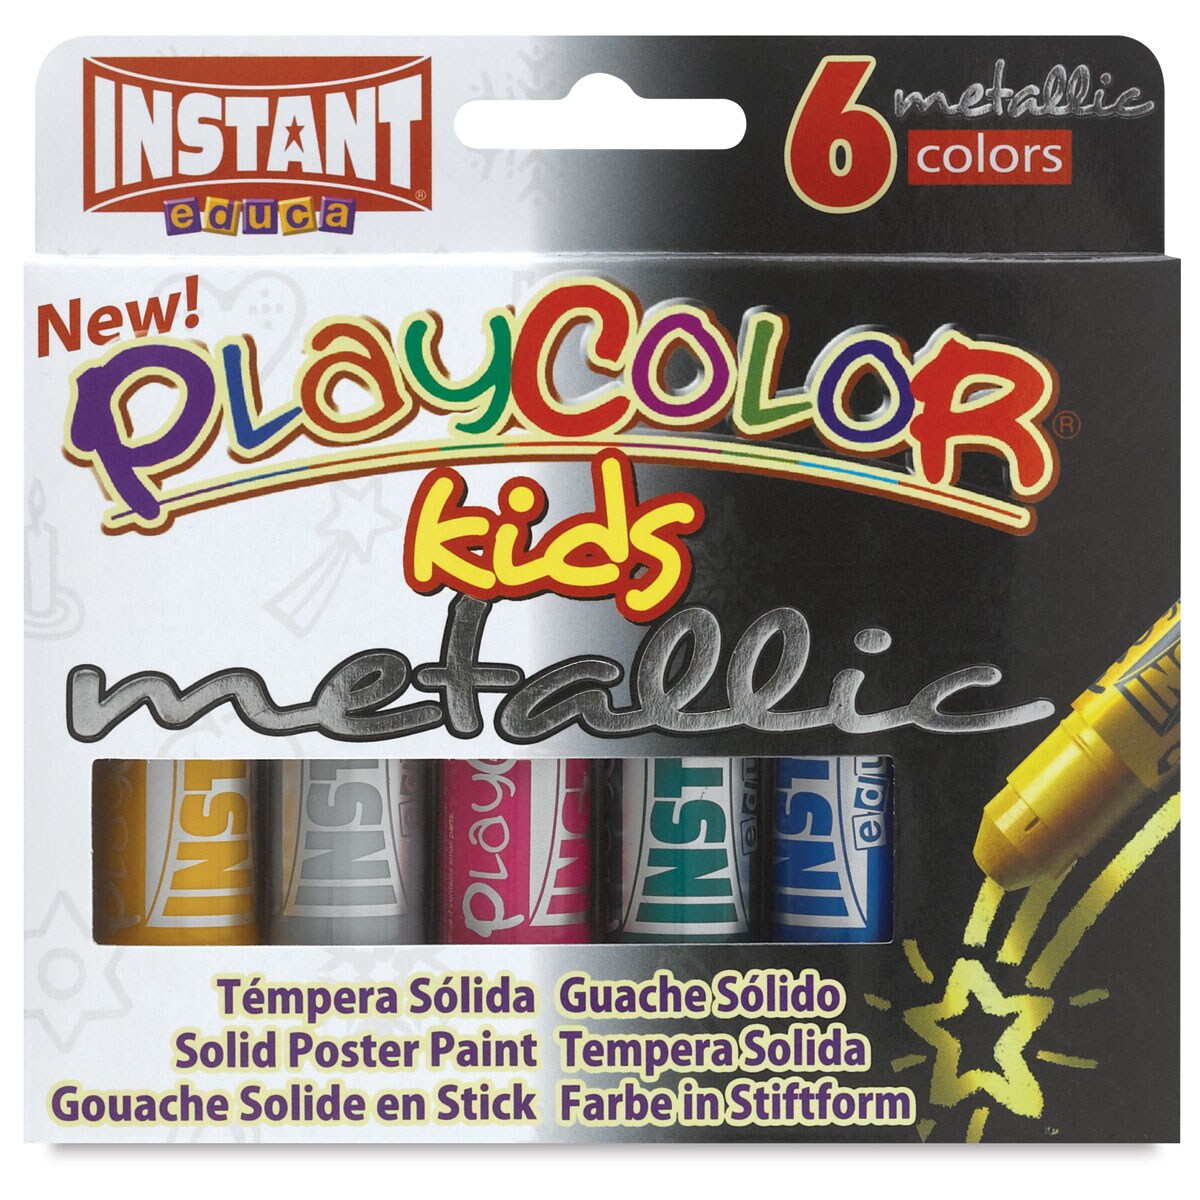 Playcolor - Metallic Colors, Set of 6, Standard Size